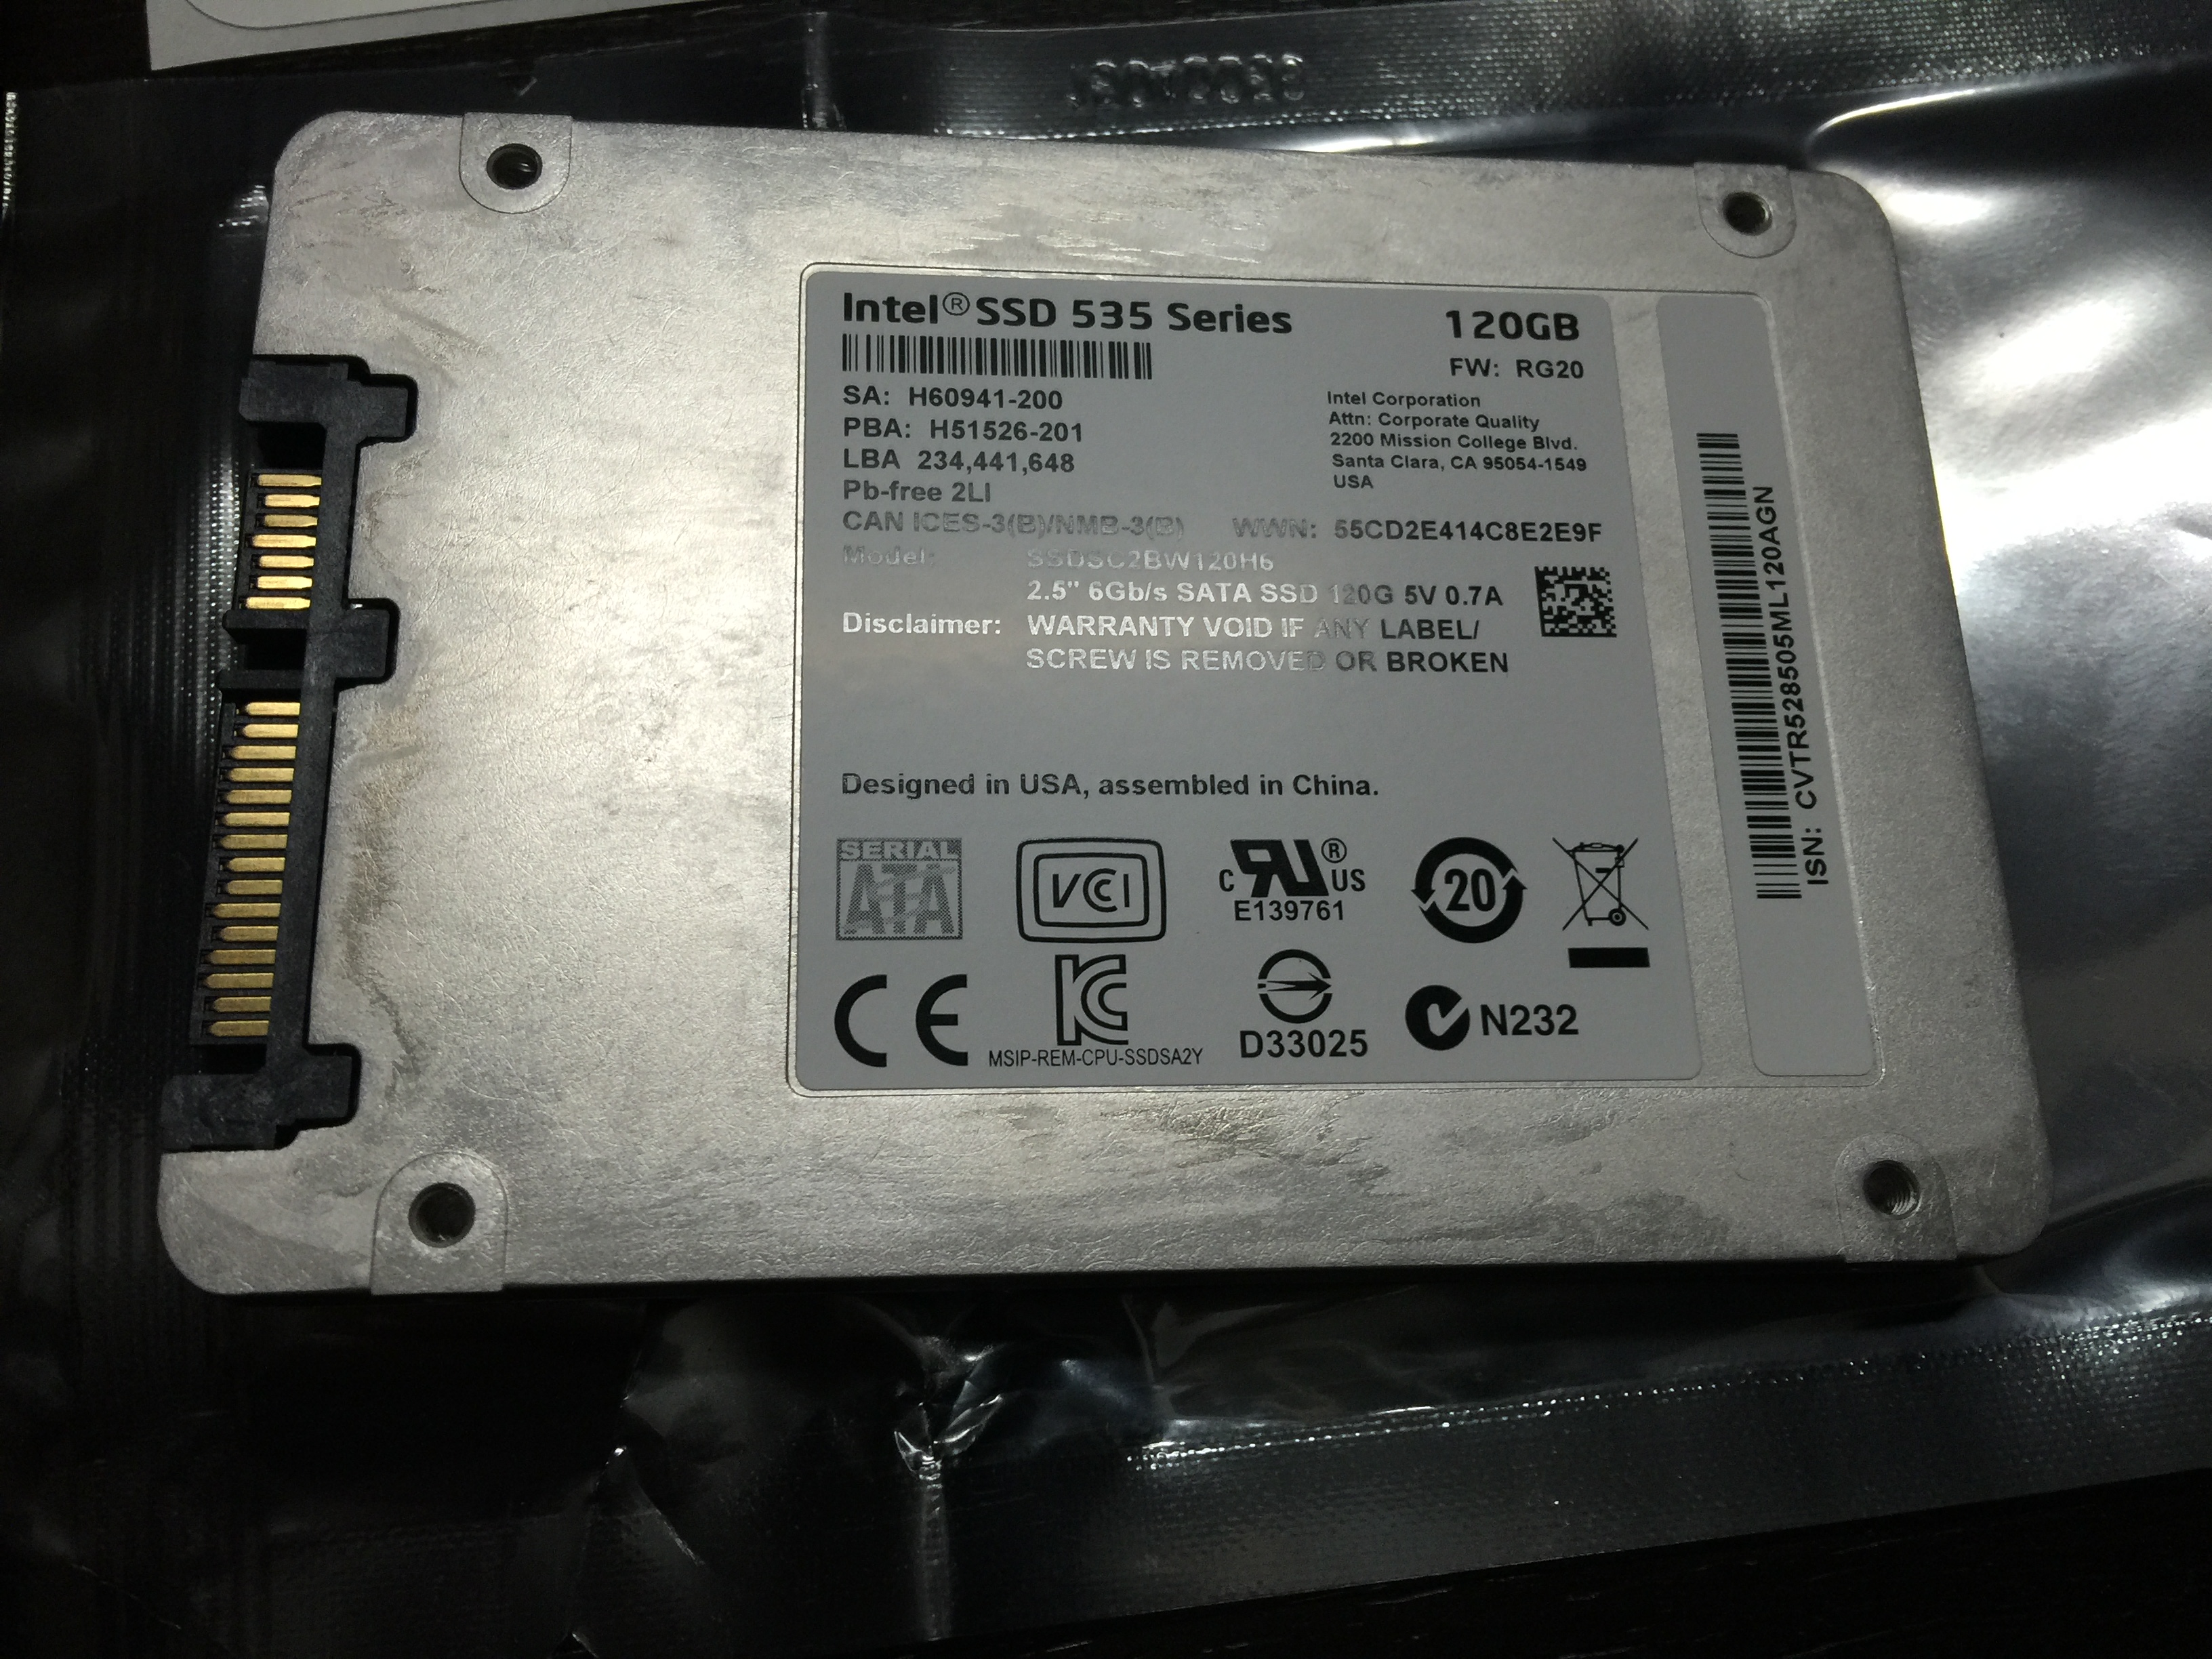 Solved: Is this a counterfeit or real Intel SSD? I can't find any info on  it. Please advise! - Intel Communities